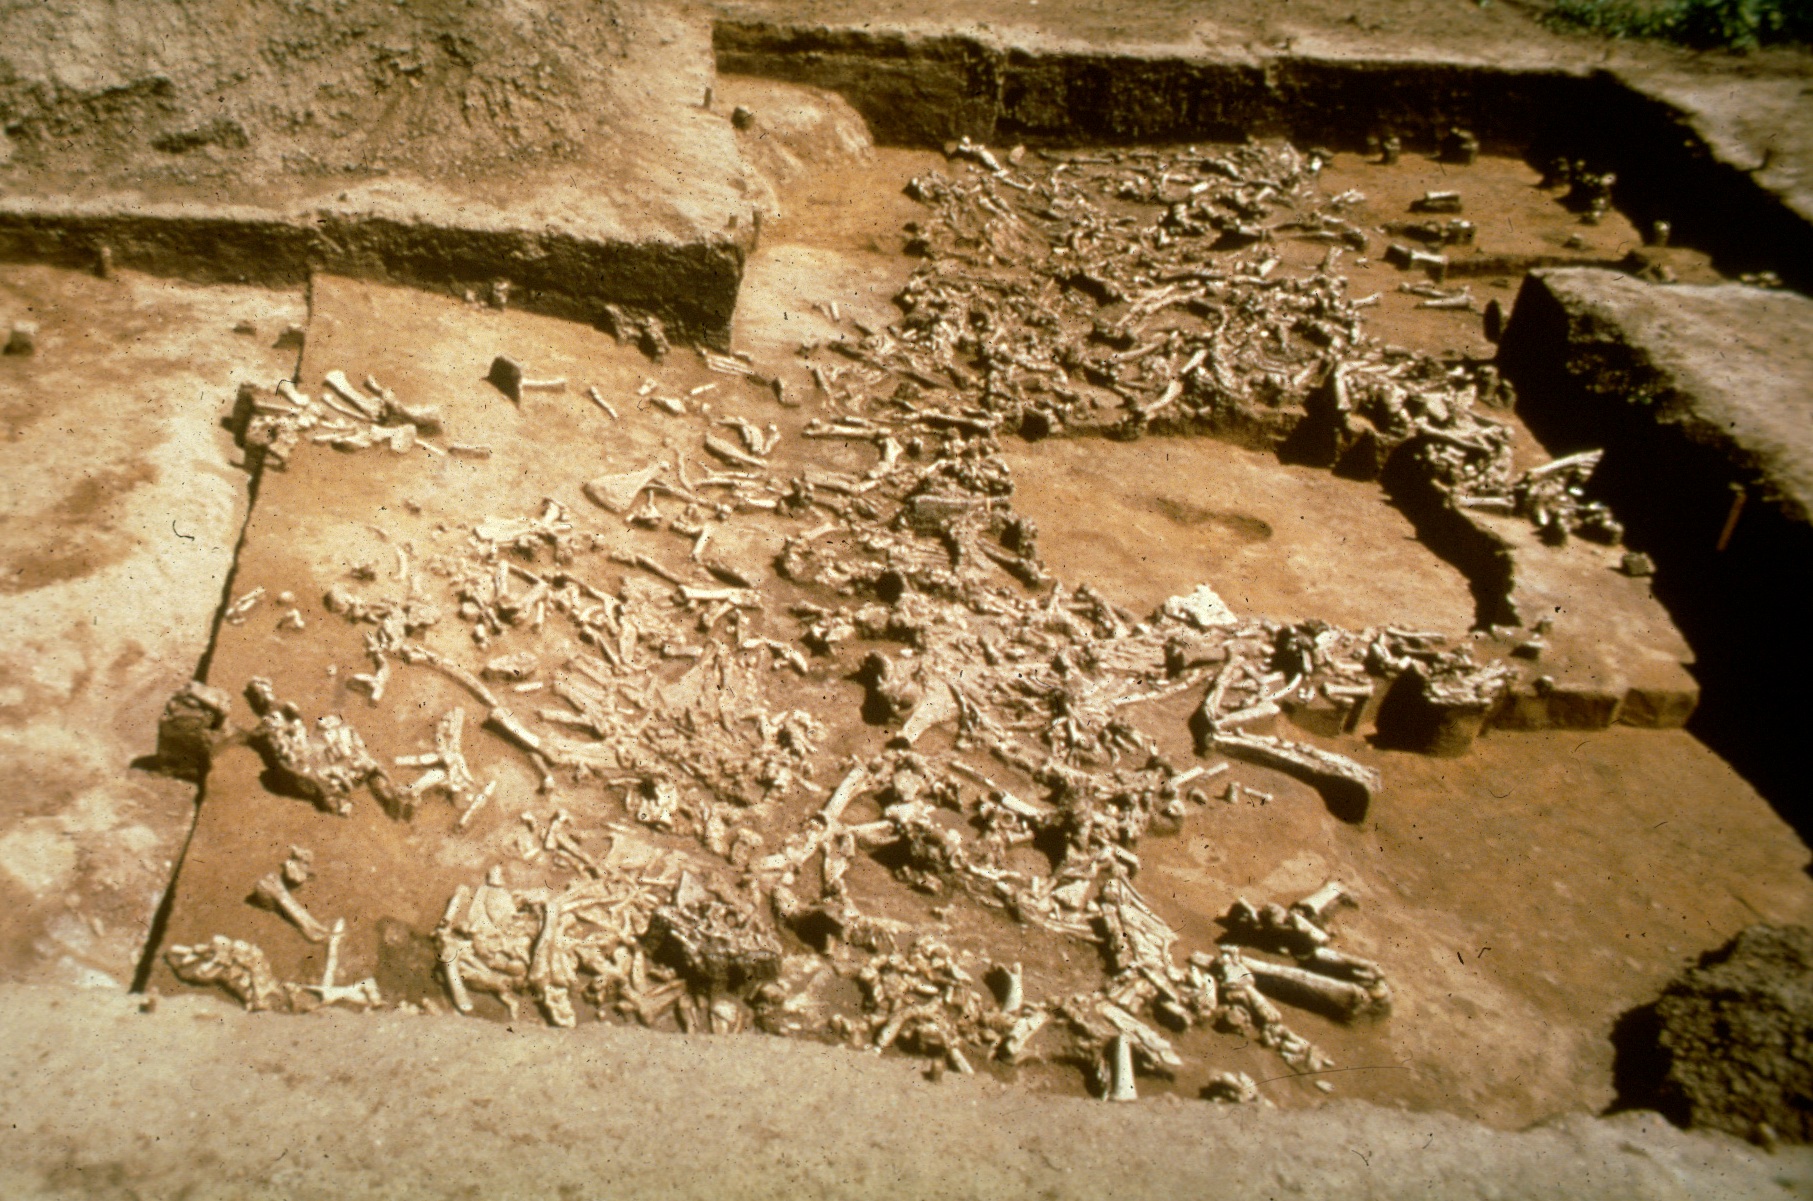 Overview of a bone bed at the Jurgens site.